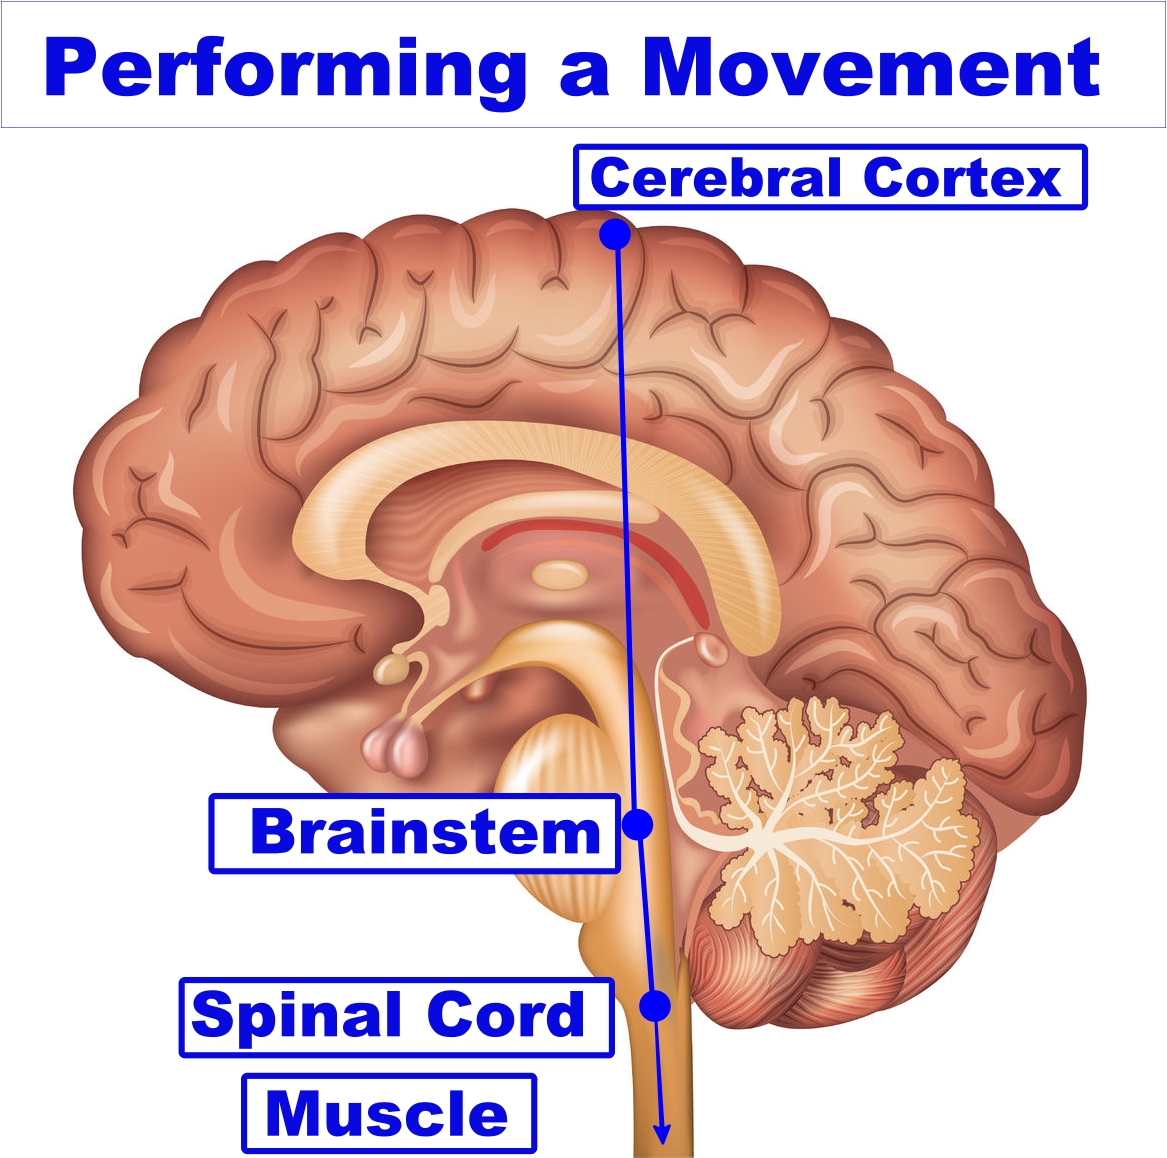 vector image of the brain areas involved in performing a movement